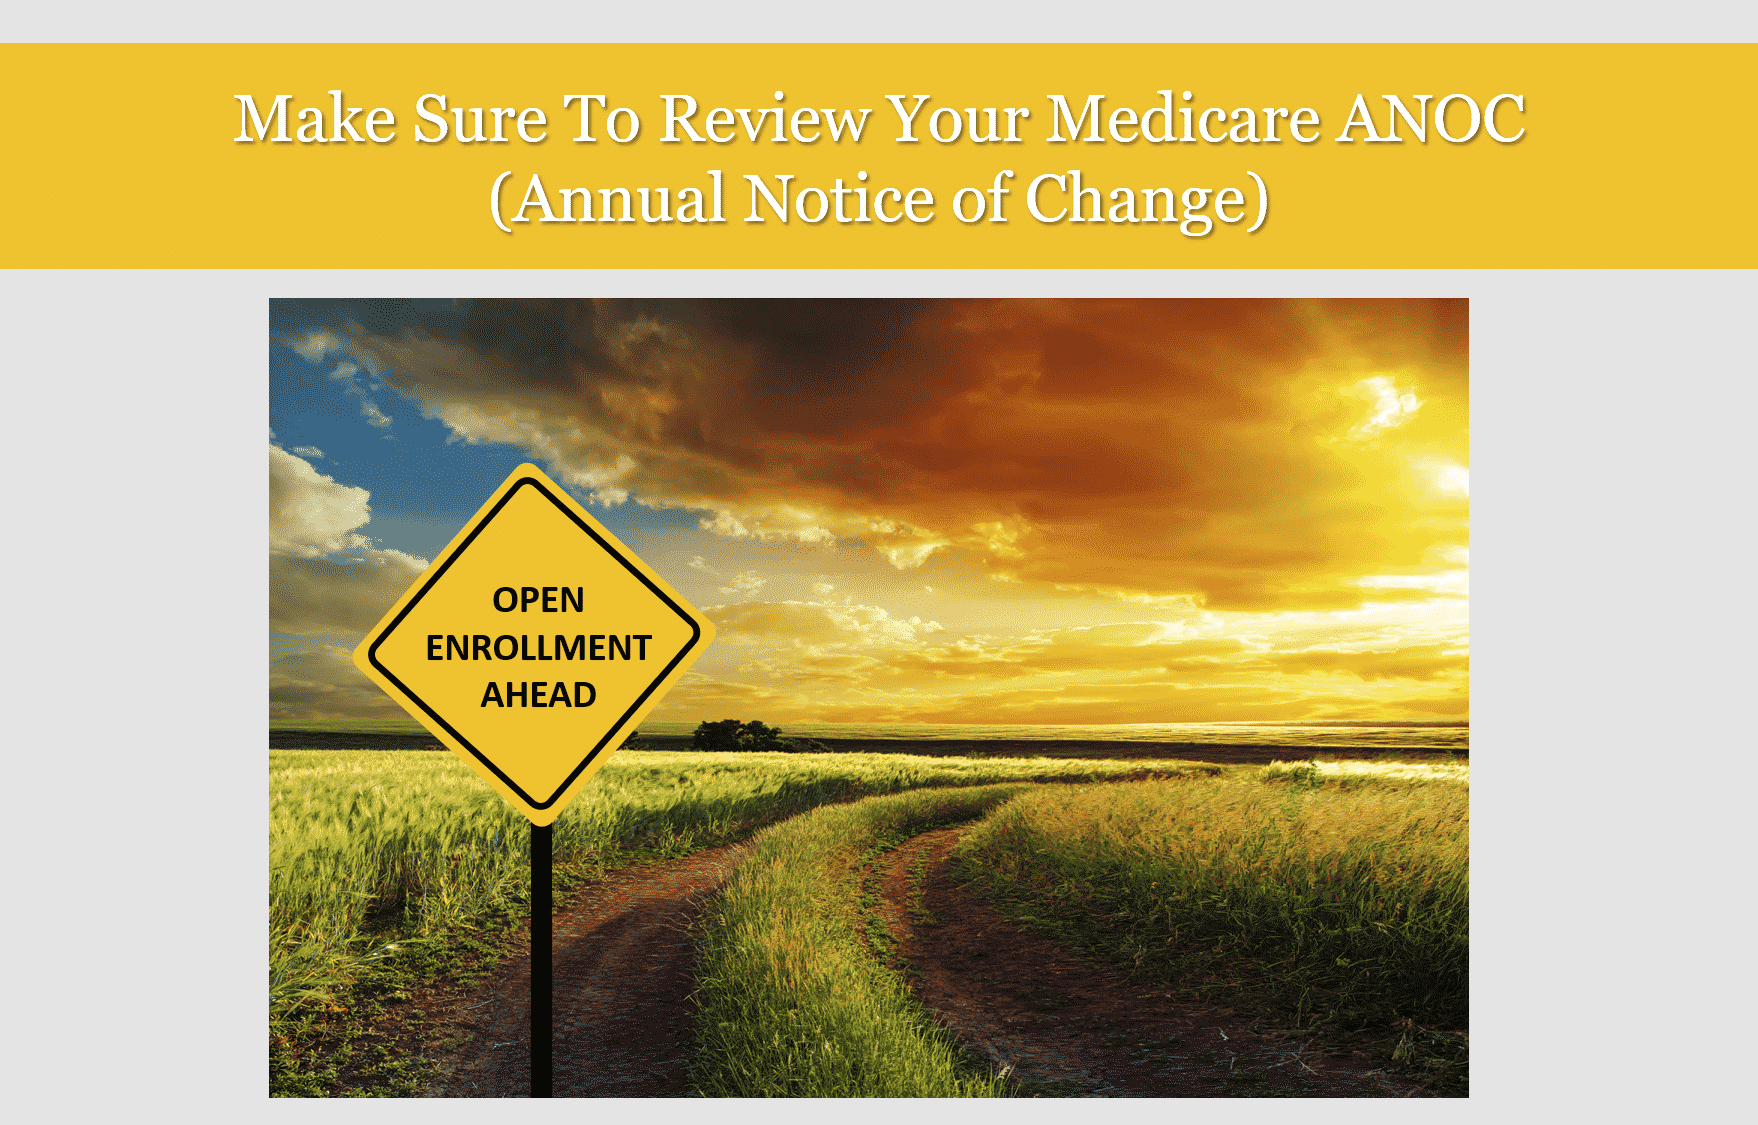 Make Sure To Review Your Medicare ANOC (Annual Notice of Change)